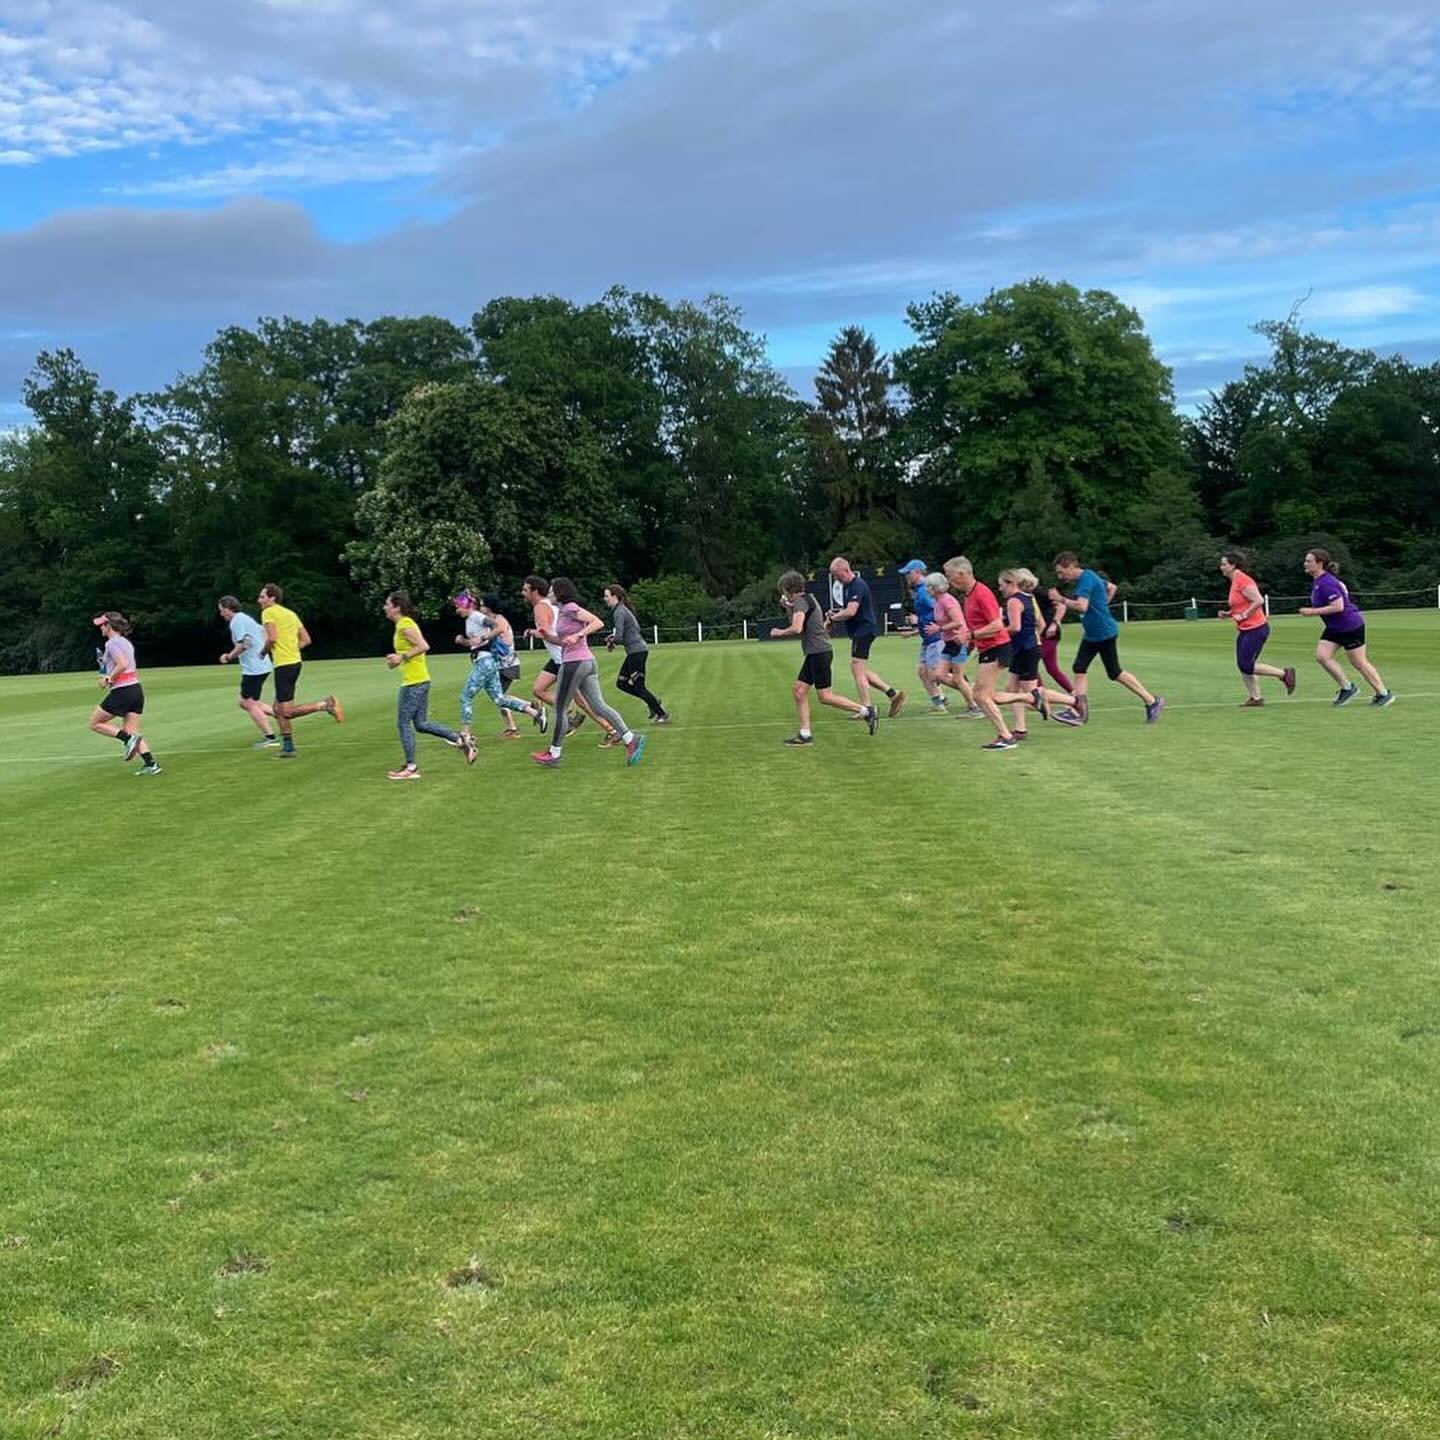 Thursday night training with @emily_iredale Great turnout for 3 min intervals and strength training @midhurst.milers #midhurst #trailrunning